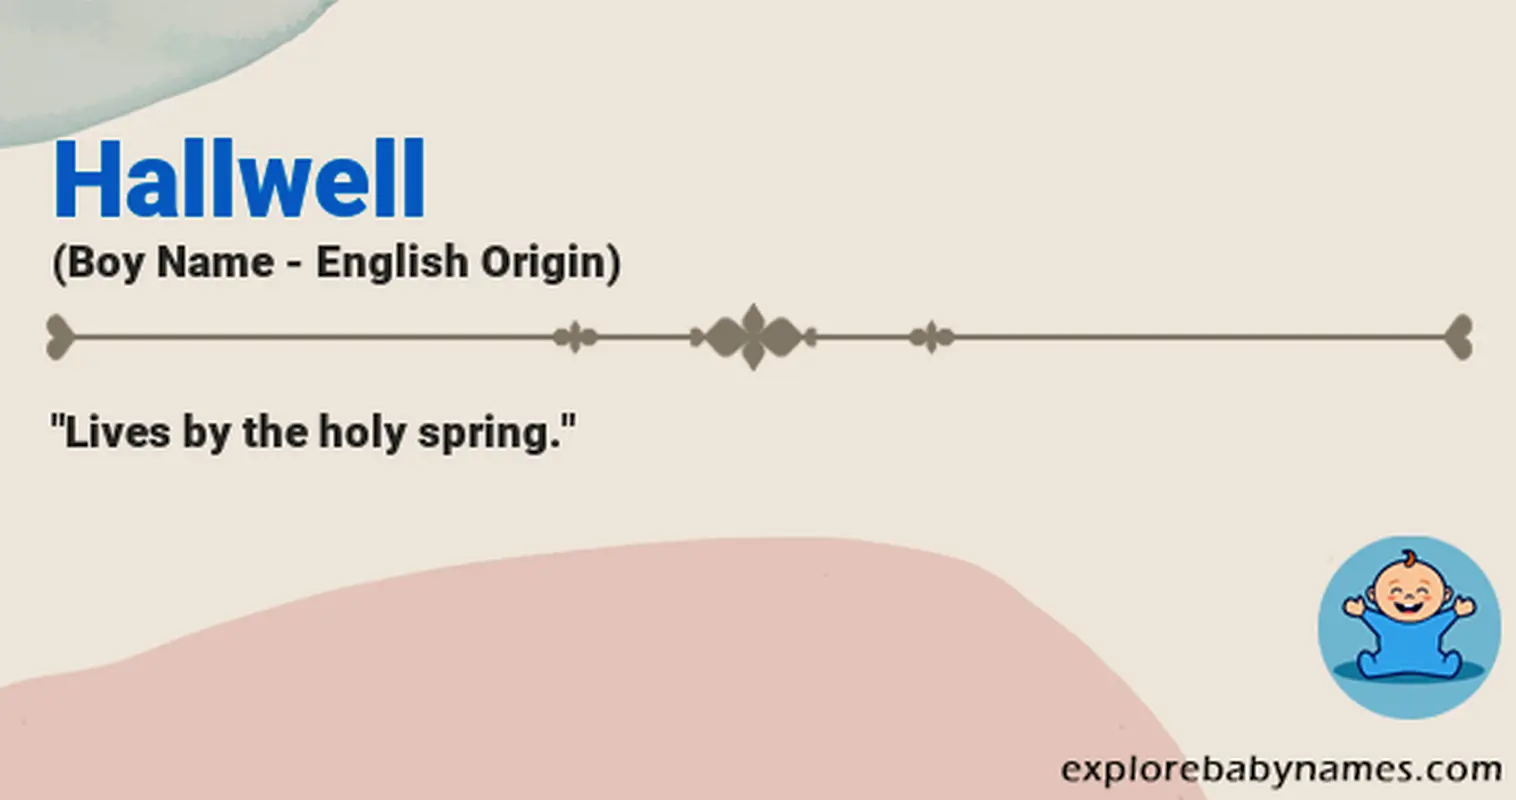 Meaning of Hallwell